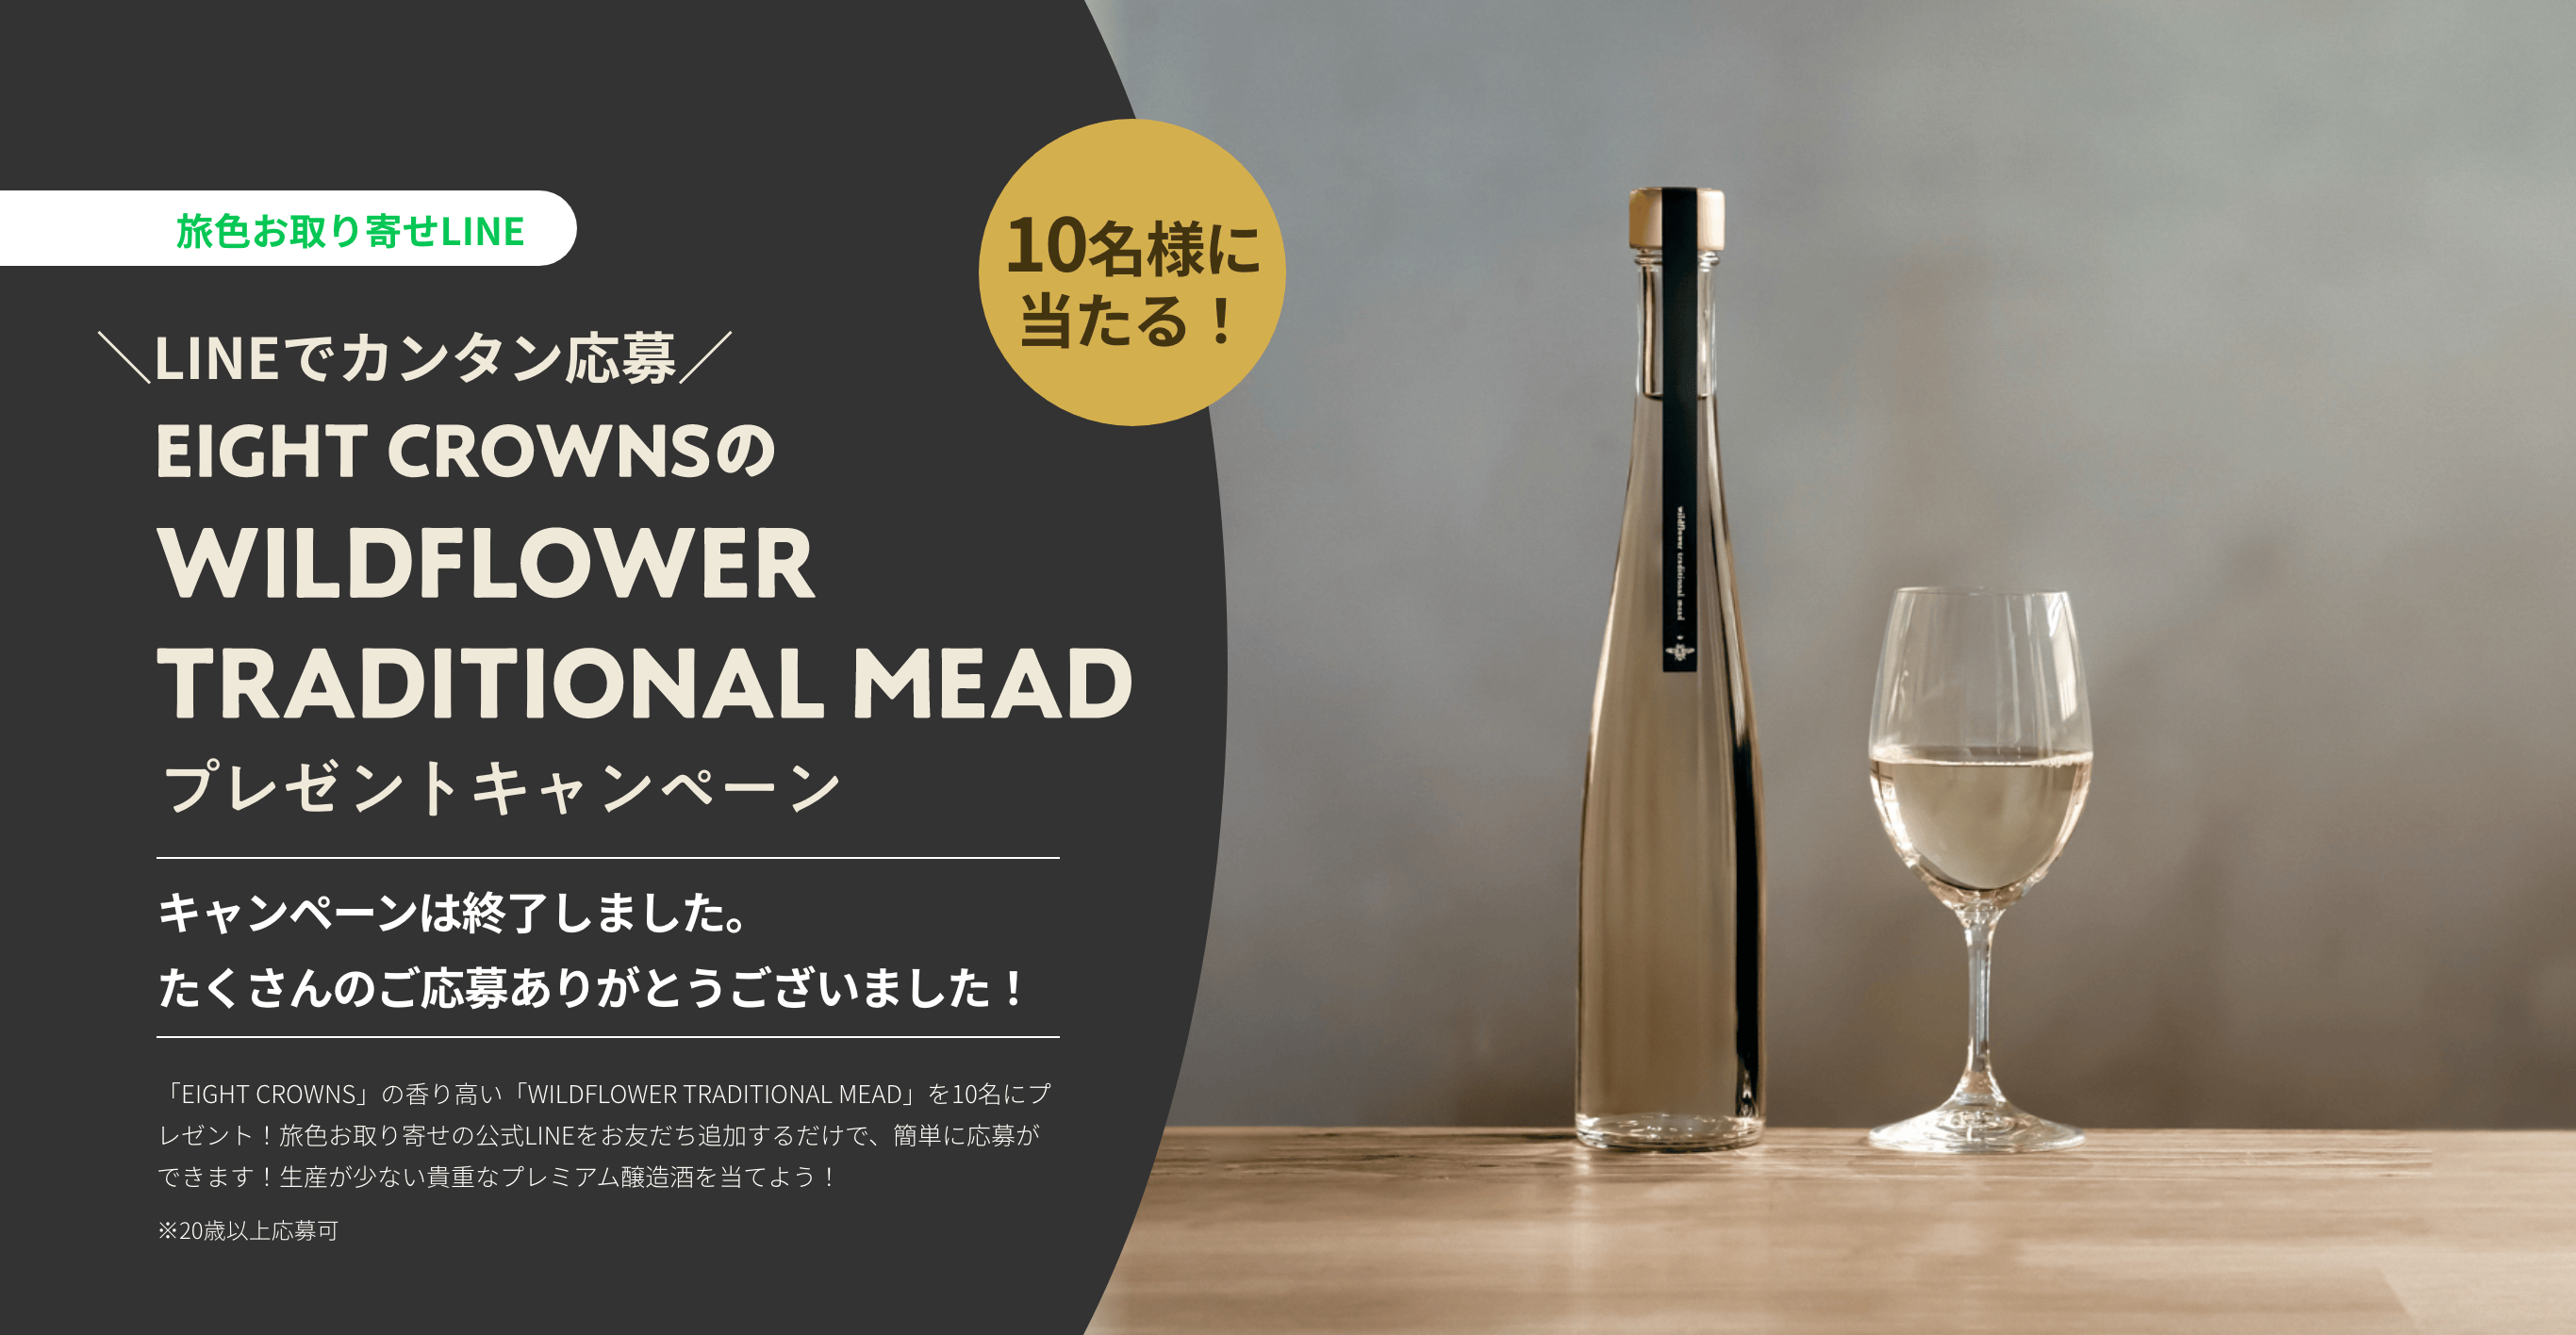 EIGHT CROWNSの「WILDFLOWER TRADITIONAL MEAD」プレゼントキャンペーン